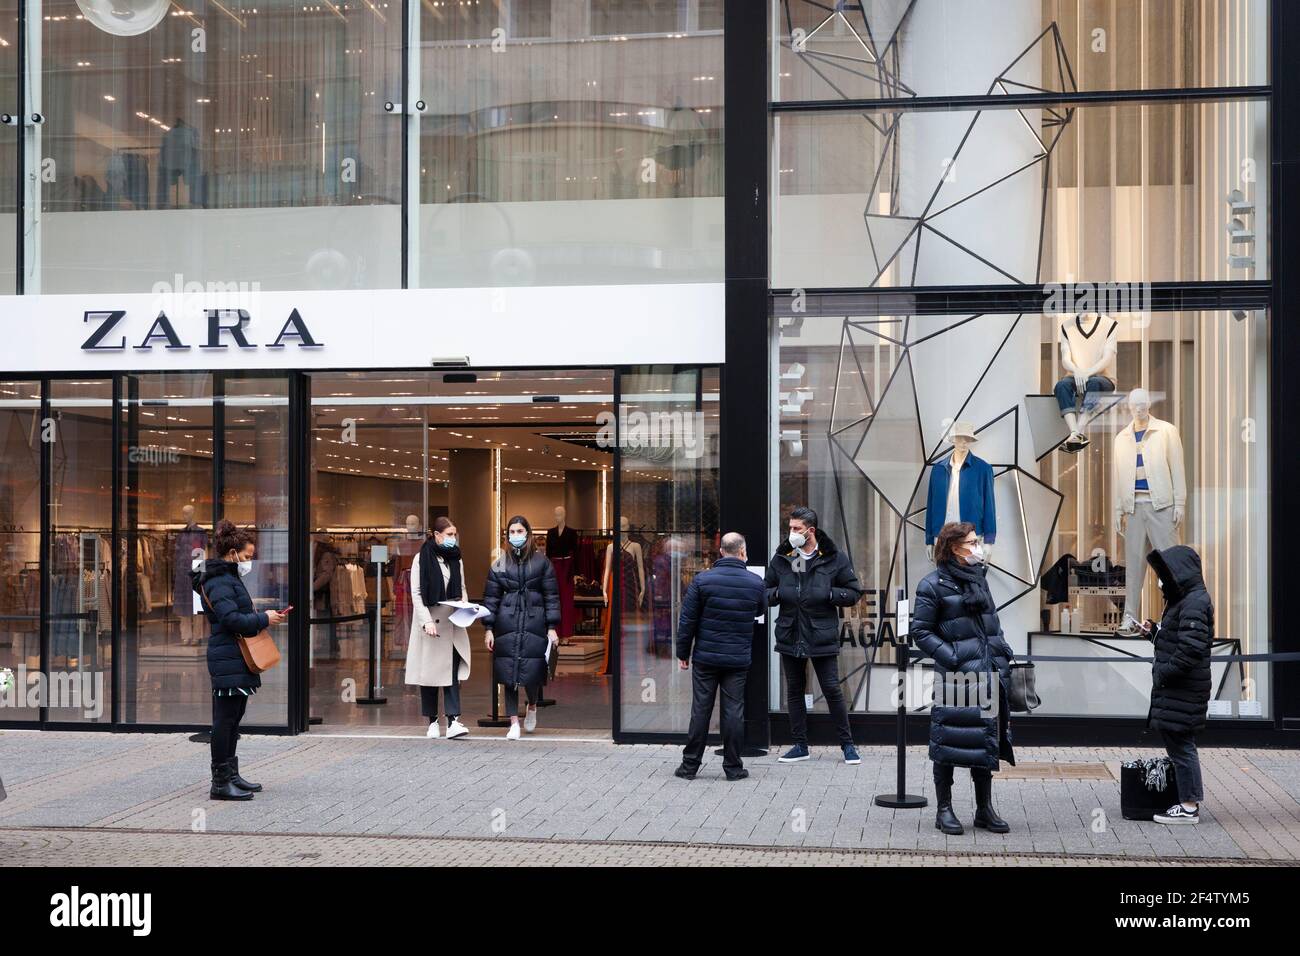 Page 3 - Zara Shop Window High Resolution Stock Photography and Images -  Alamy